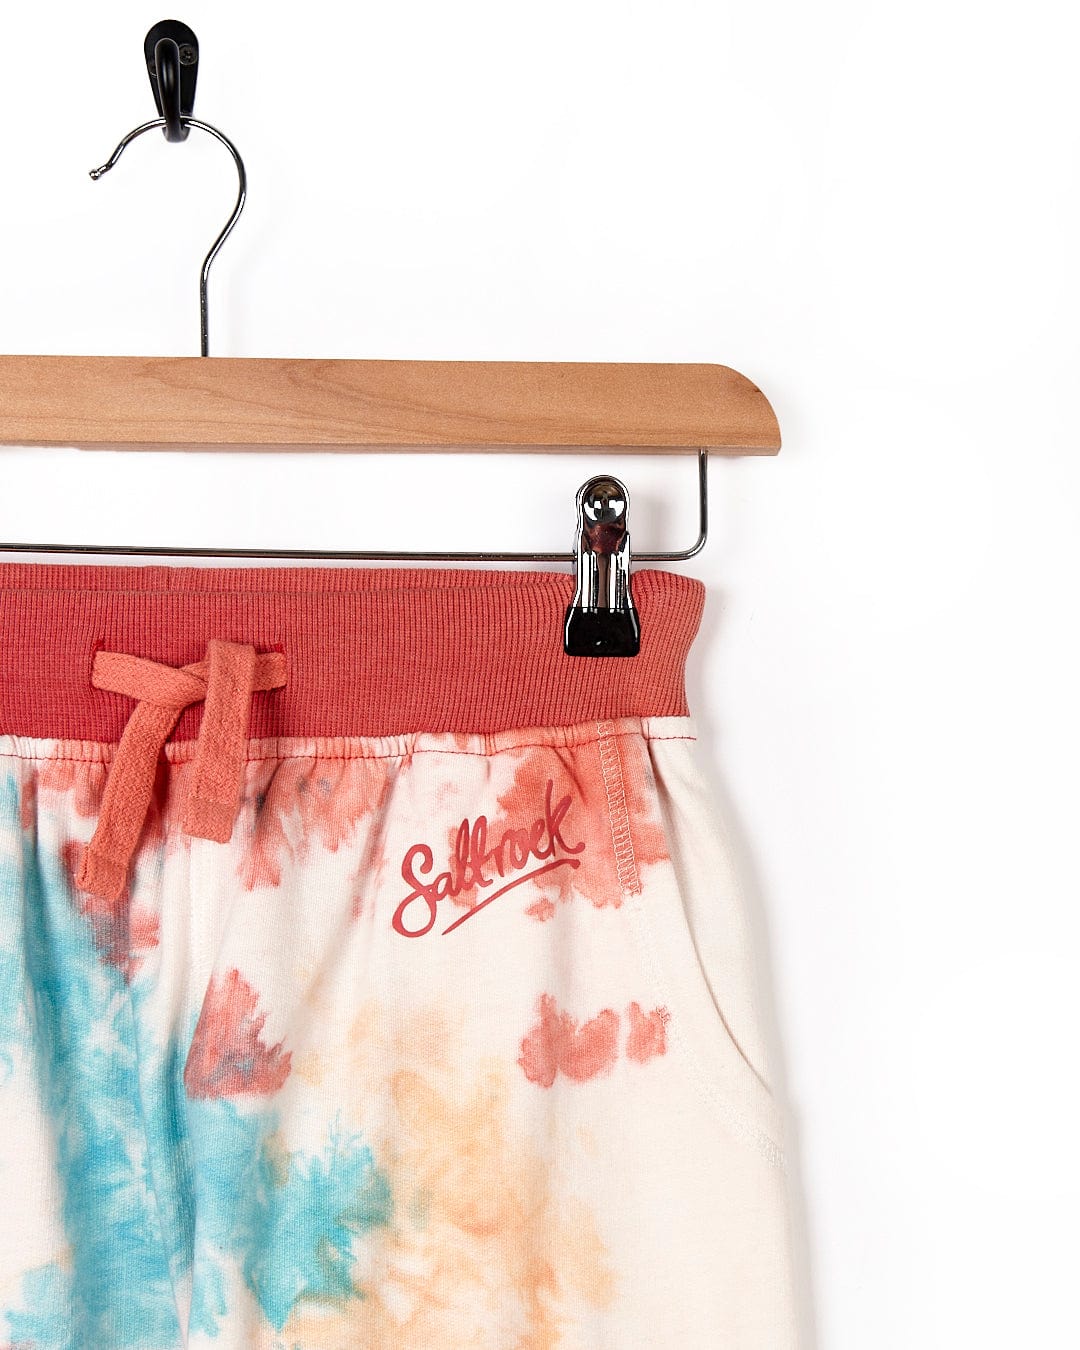 A pair of Saltrock Hippy - Kids Tie Dye Jogger - Multi shorts hanging on a hanger.